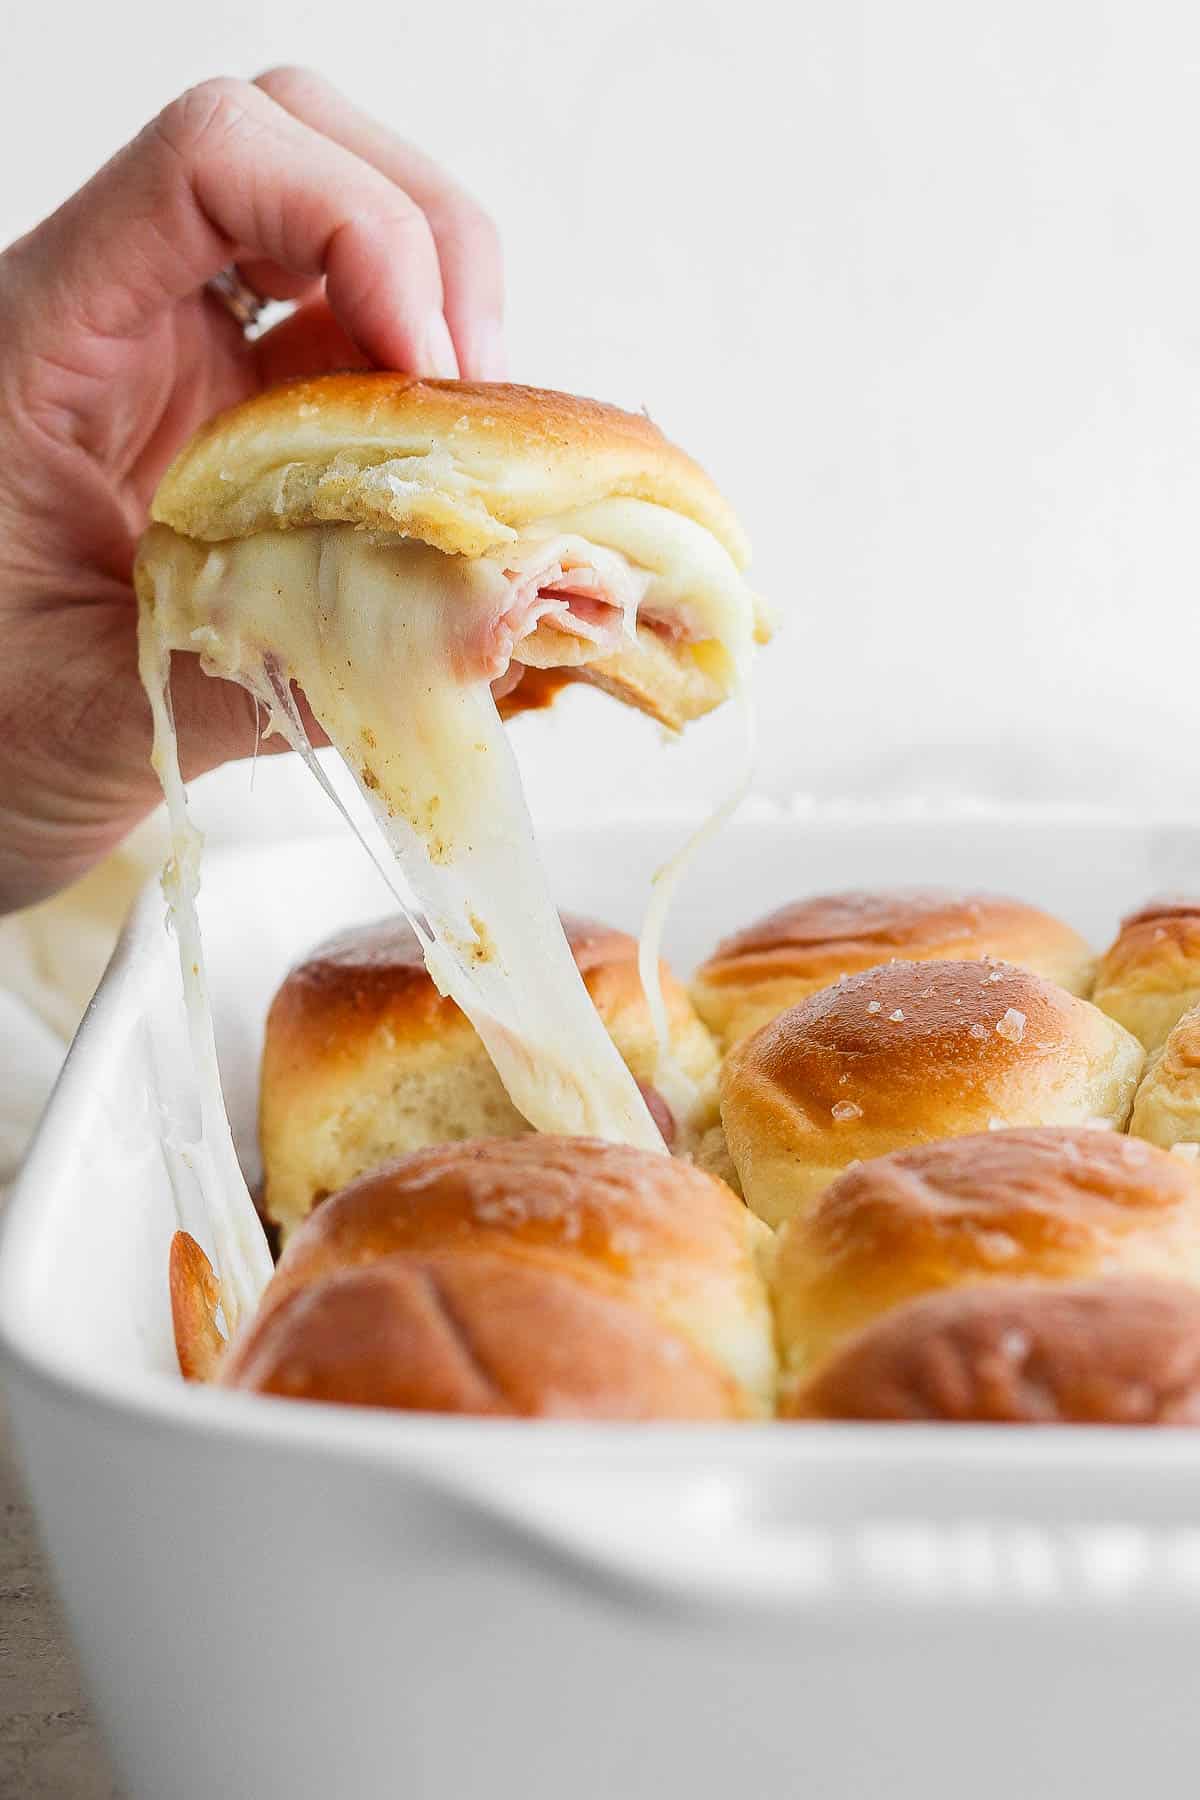 A ham and cheese slider being pulled out.